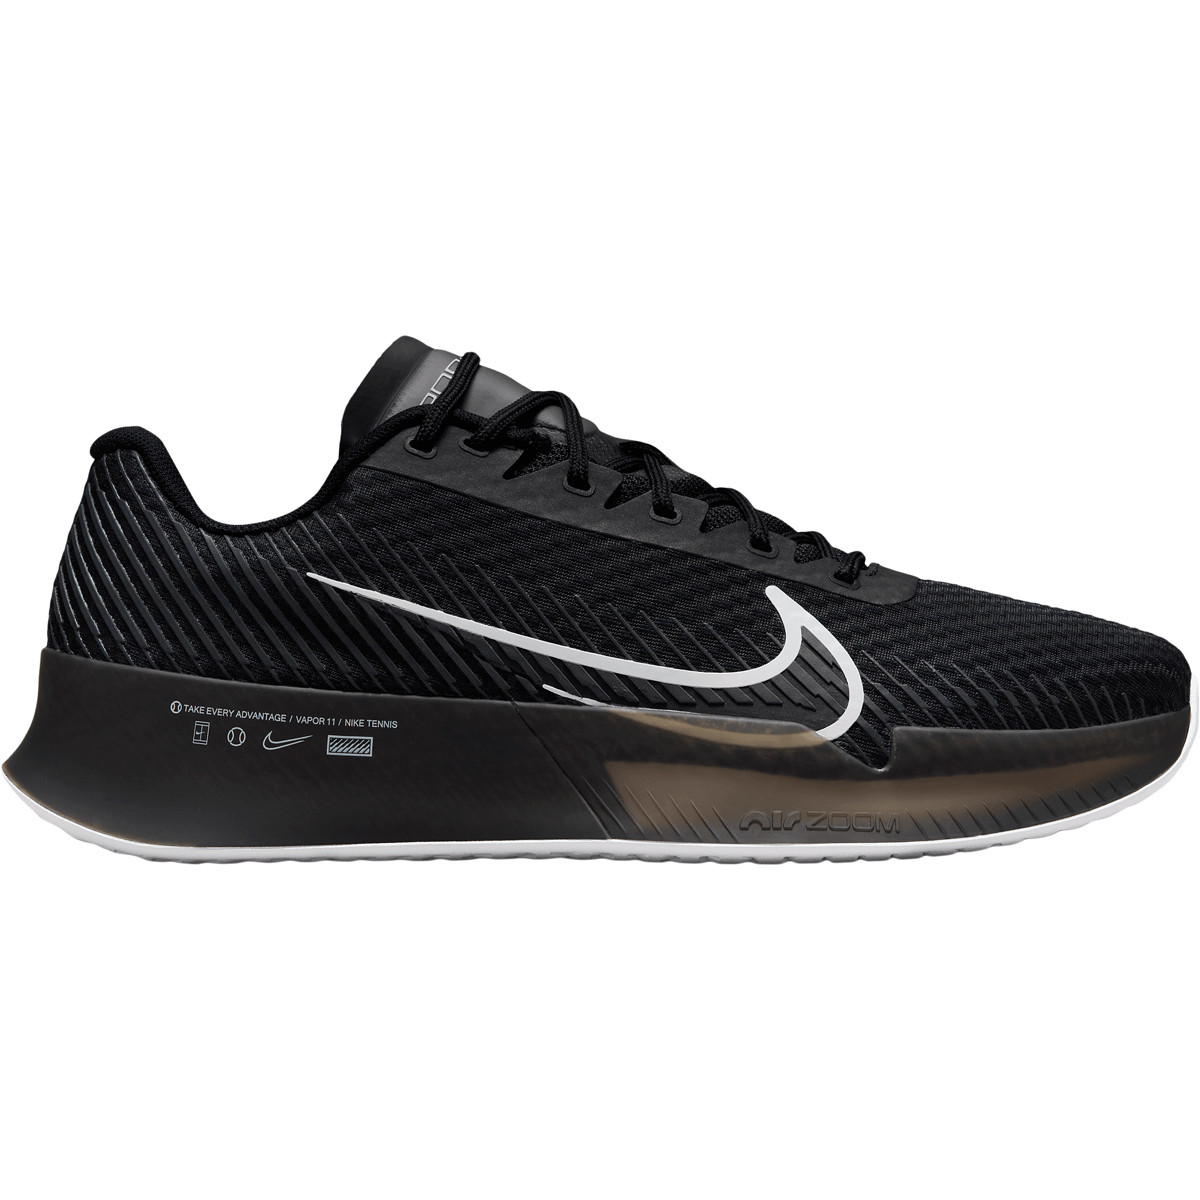 CHAUSSURES NIKE AIR ZOOM VAPOR 11 SURFACES DURES - NIKE - Homme - Chaussures